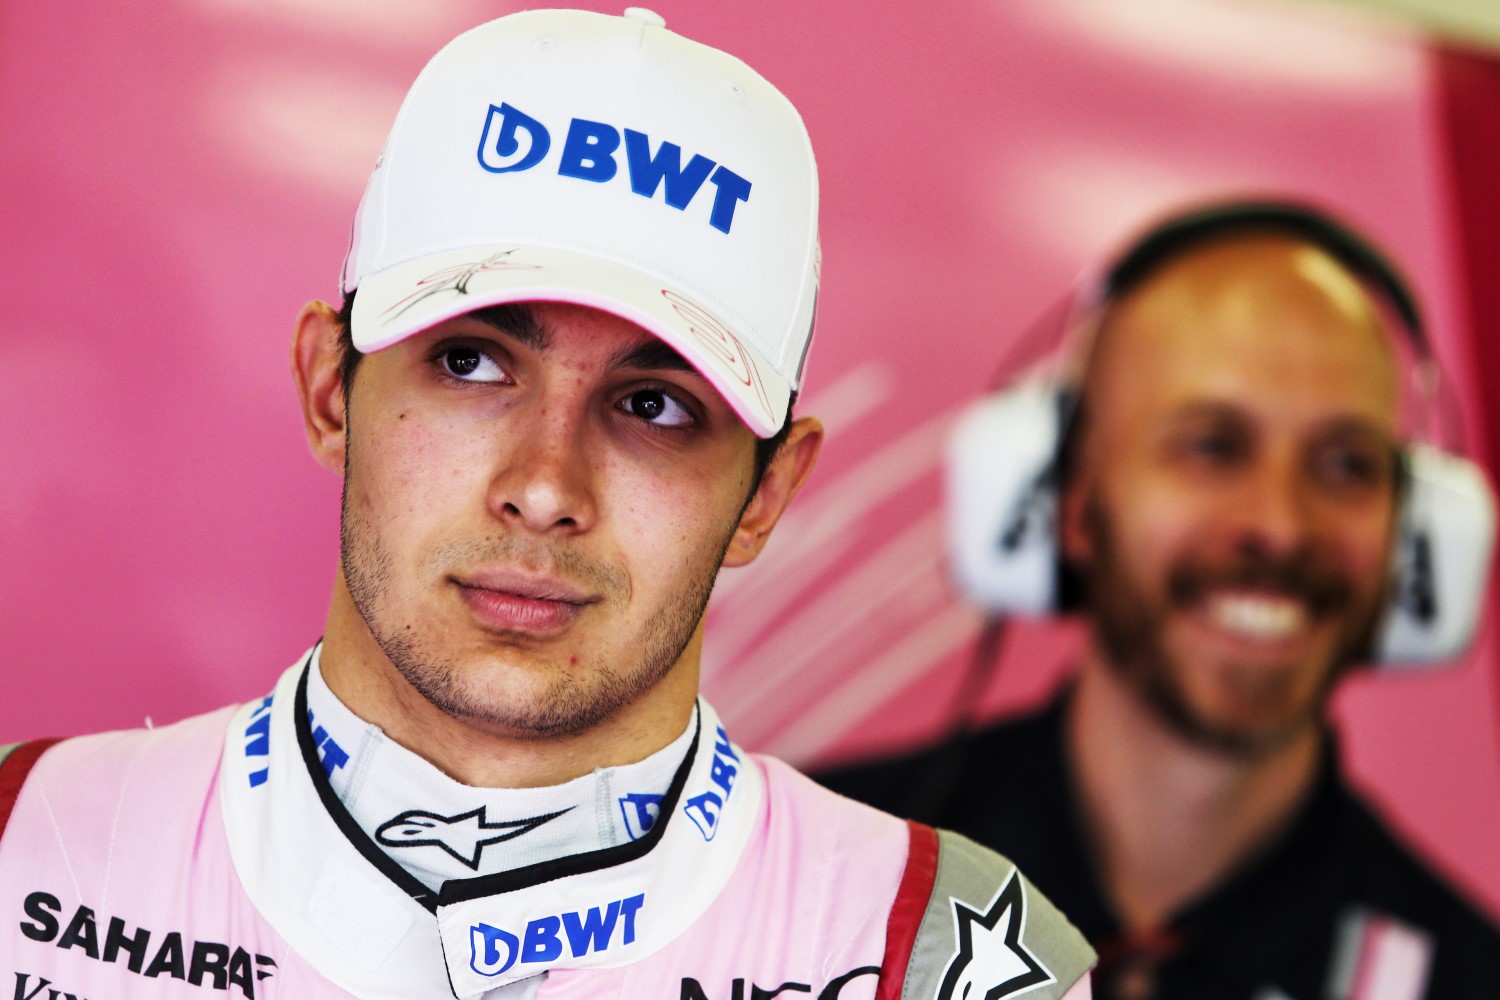 Esteban Ocon - now they release him when most of the good rides are gone?